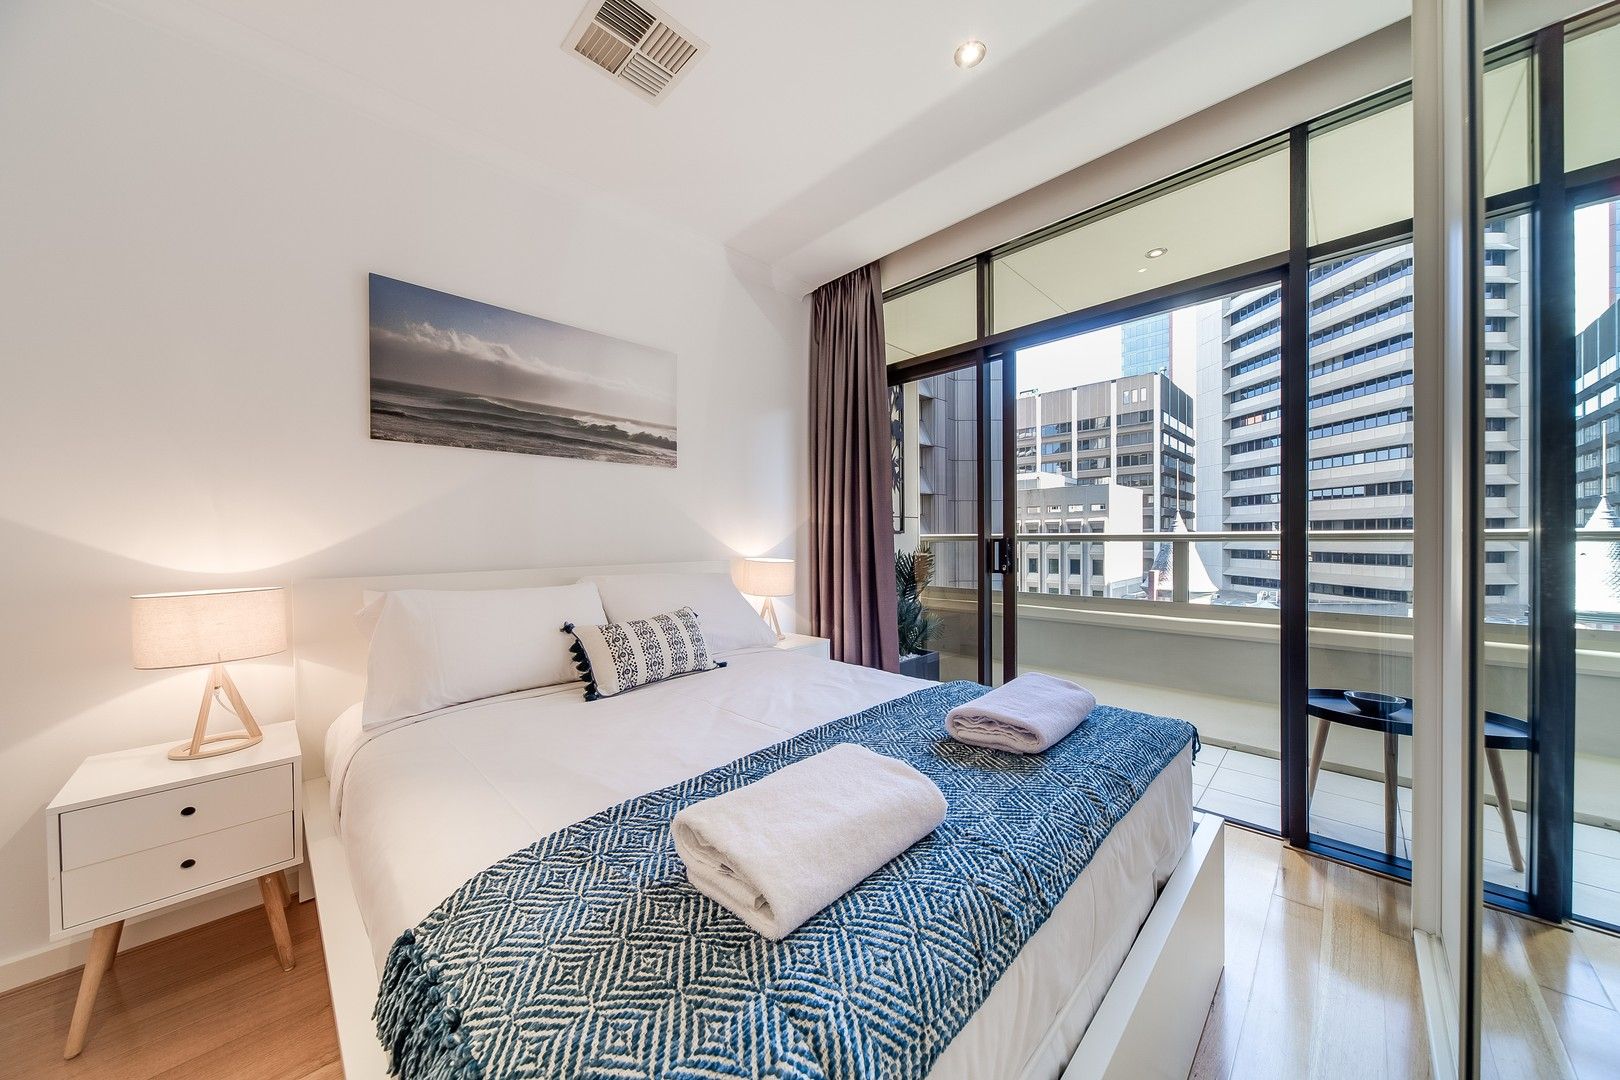 2 bedrooms Apartment / Unit / Flat in 605/39 Grenfell Street ADELAIDE SA, 5000